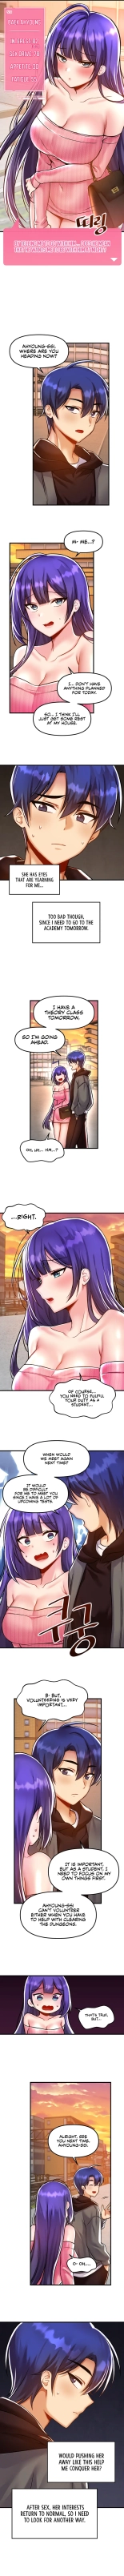 Trapped in the Academy's Eroge : página 329